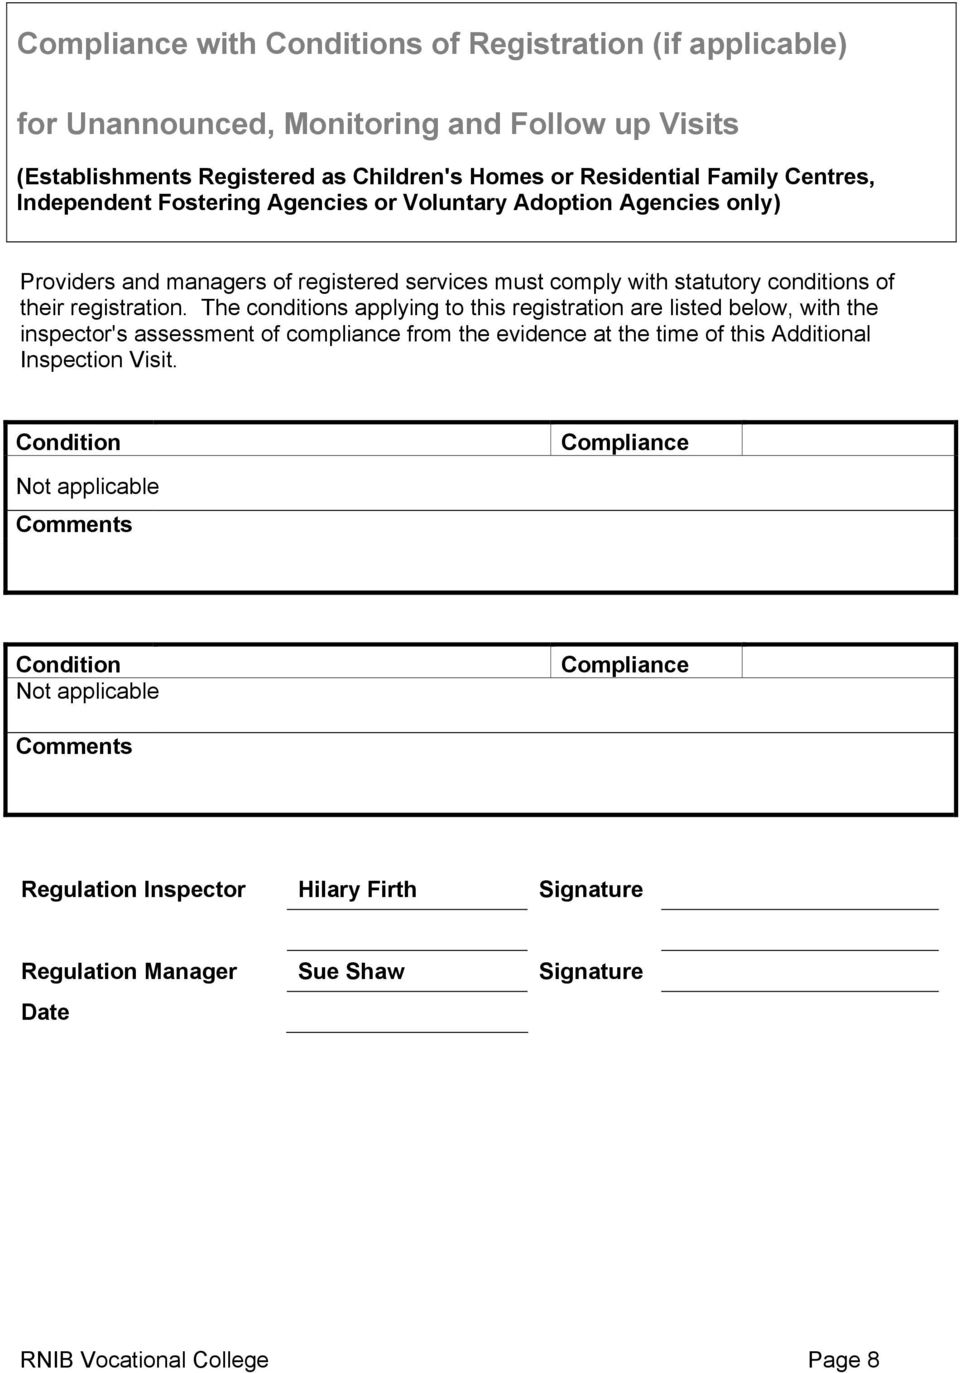 The conditions applying to this registration are listed below, with the inspector's assessment of compliance from the evidence at the time of this Additional Inspection Visit.